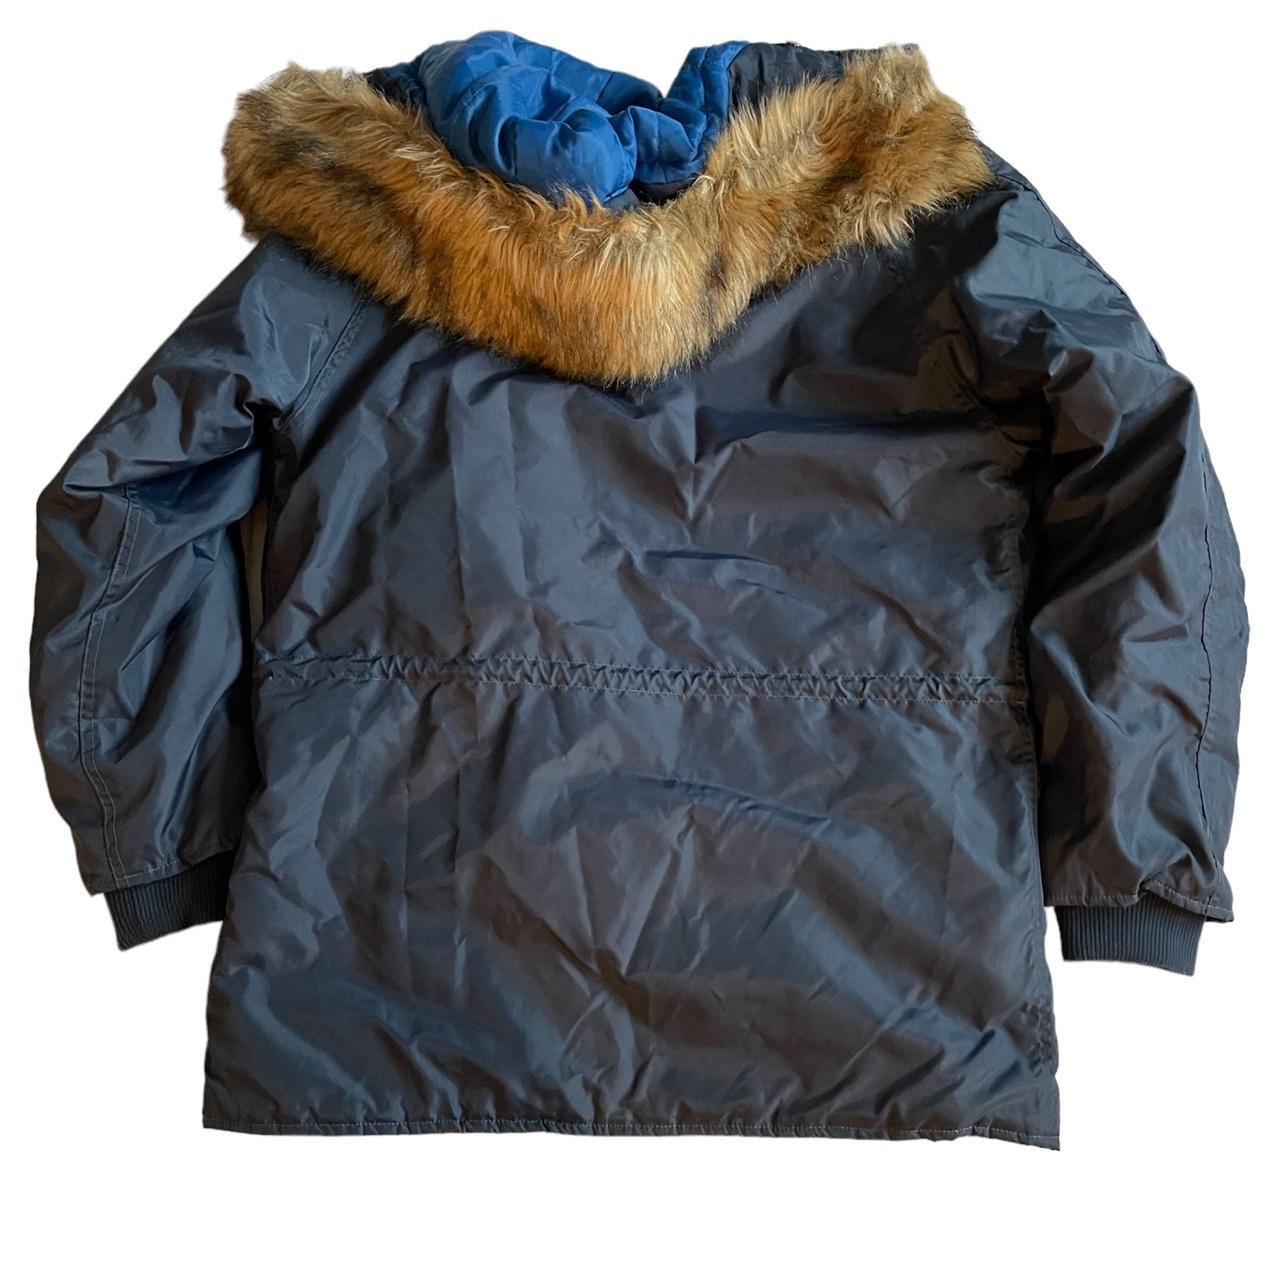 Product Image 3 - Final markdown!!
NATIVE YOUTH Men's Waterproof